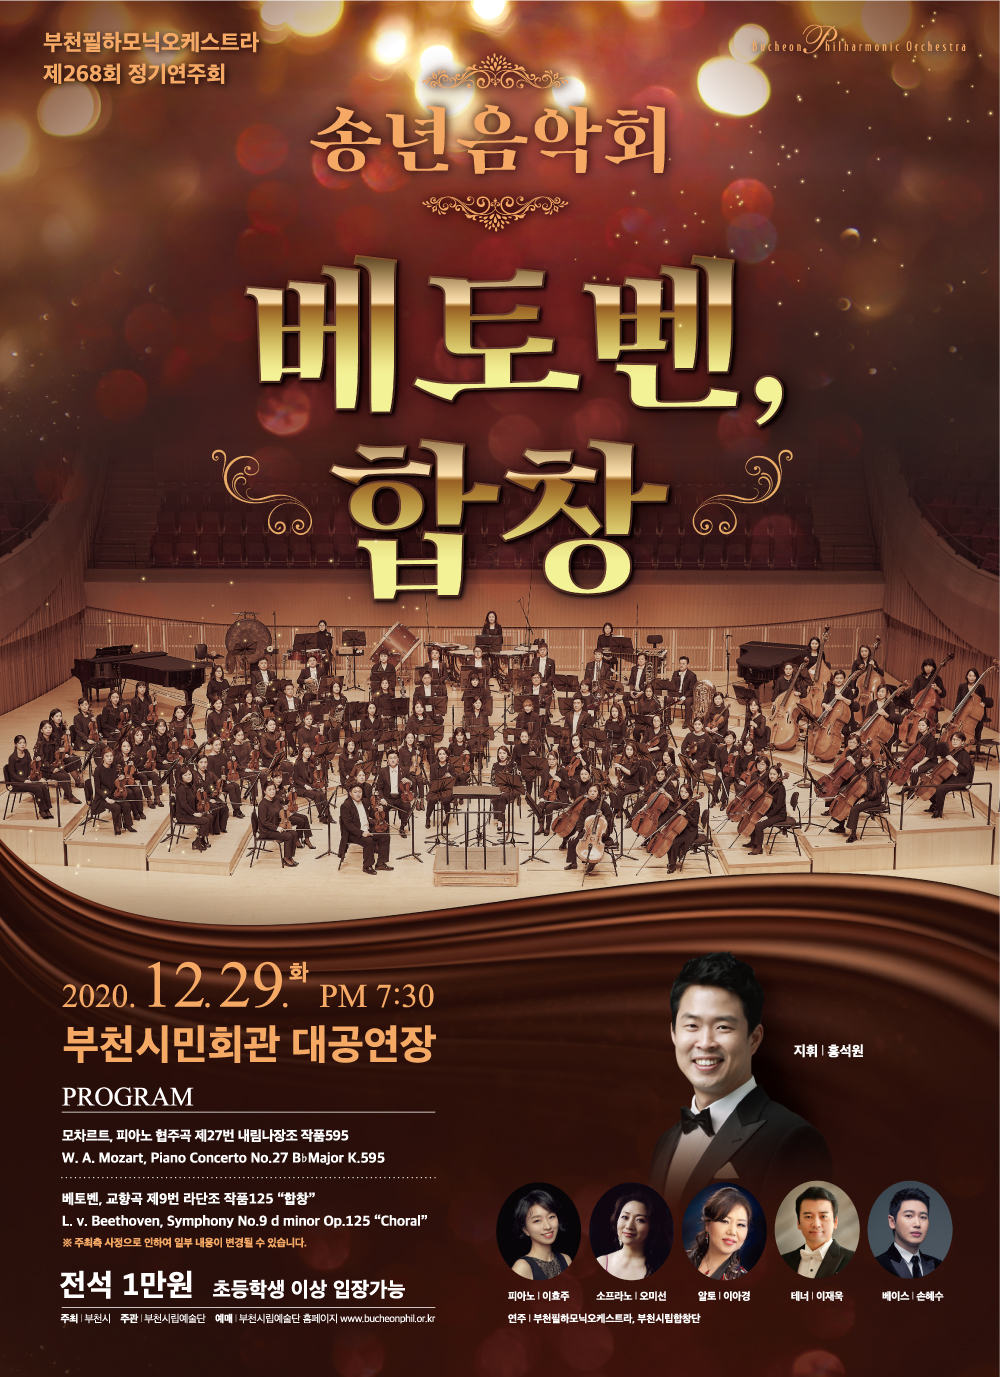 [12.29]Bucheon Philharmonic Orchestra 268th Subscription Concert - Beethoven, Choral